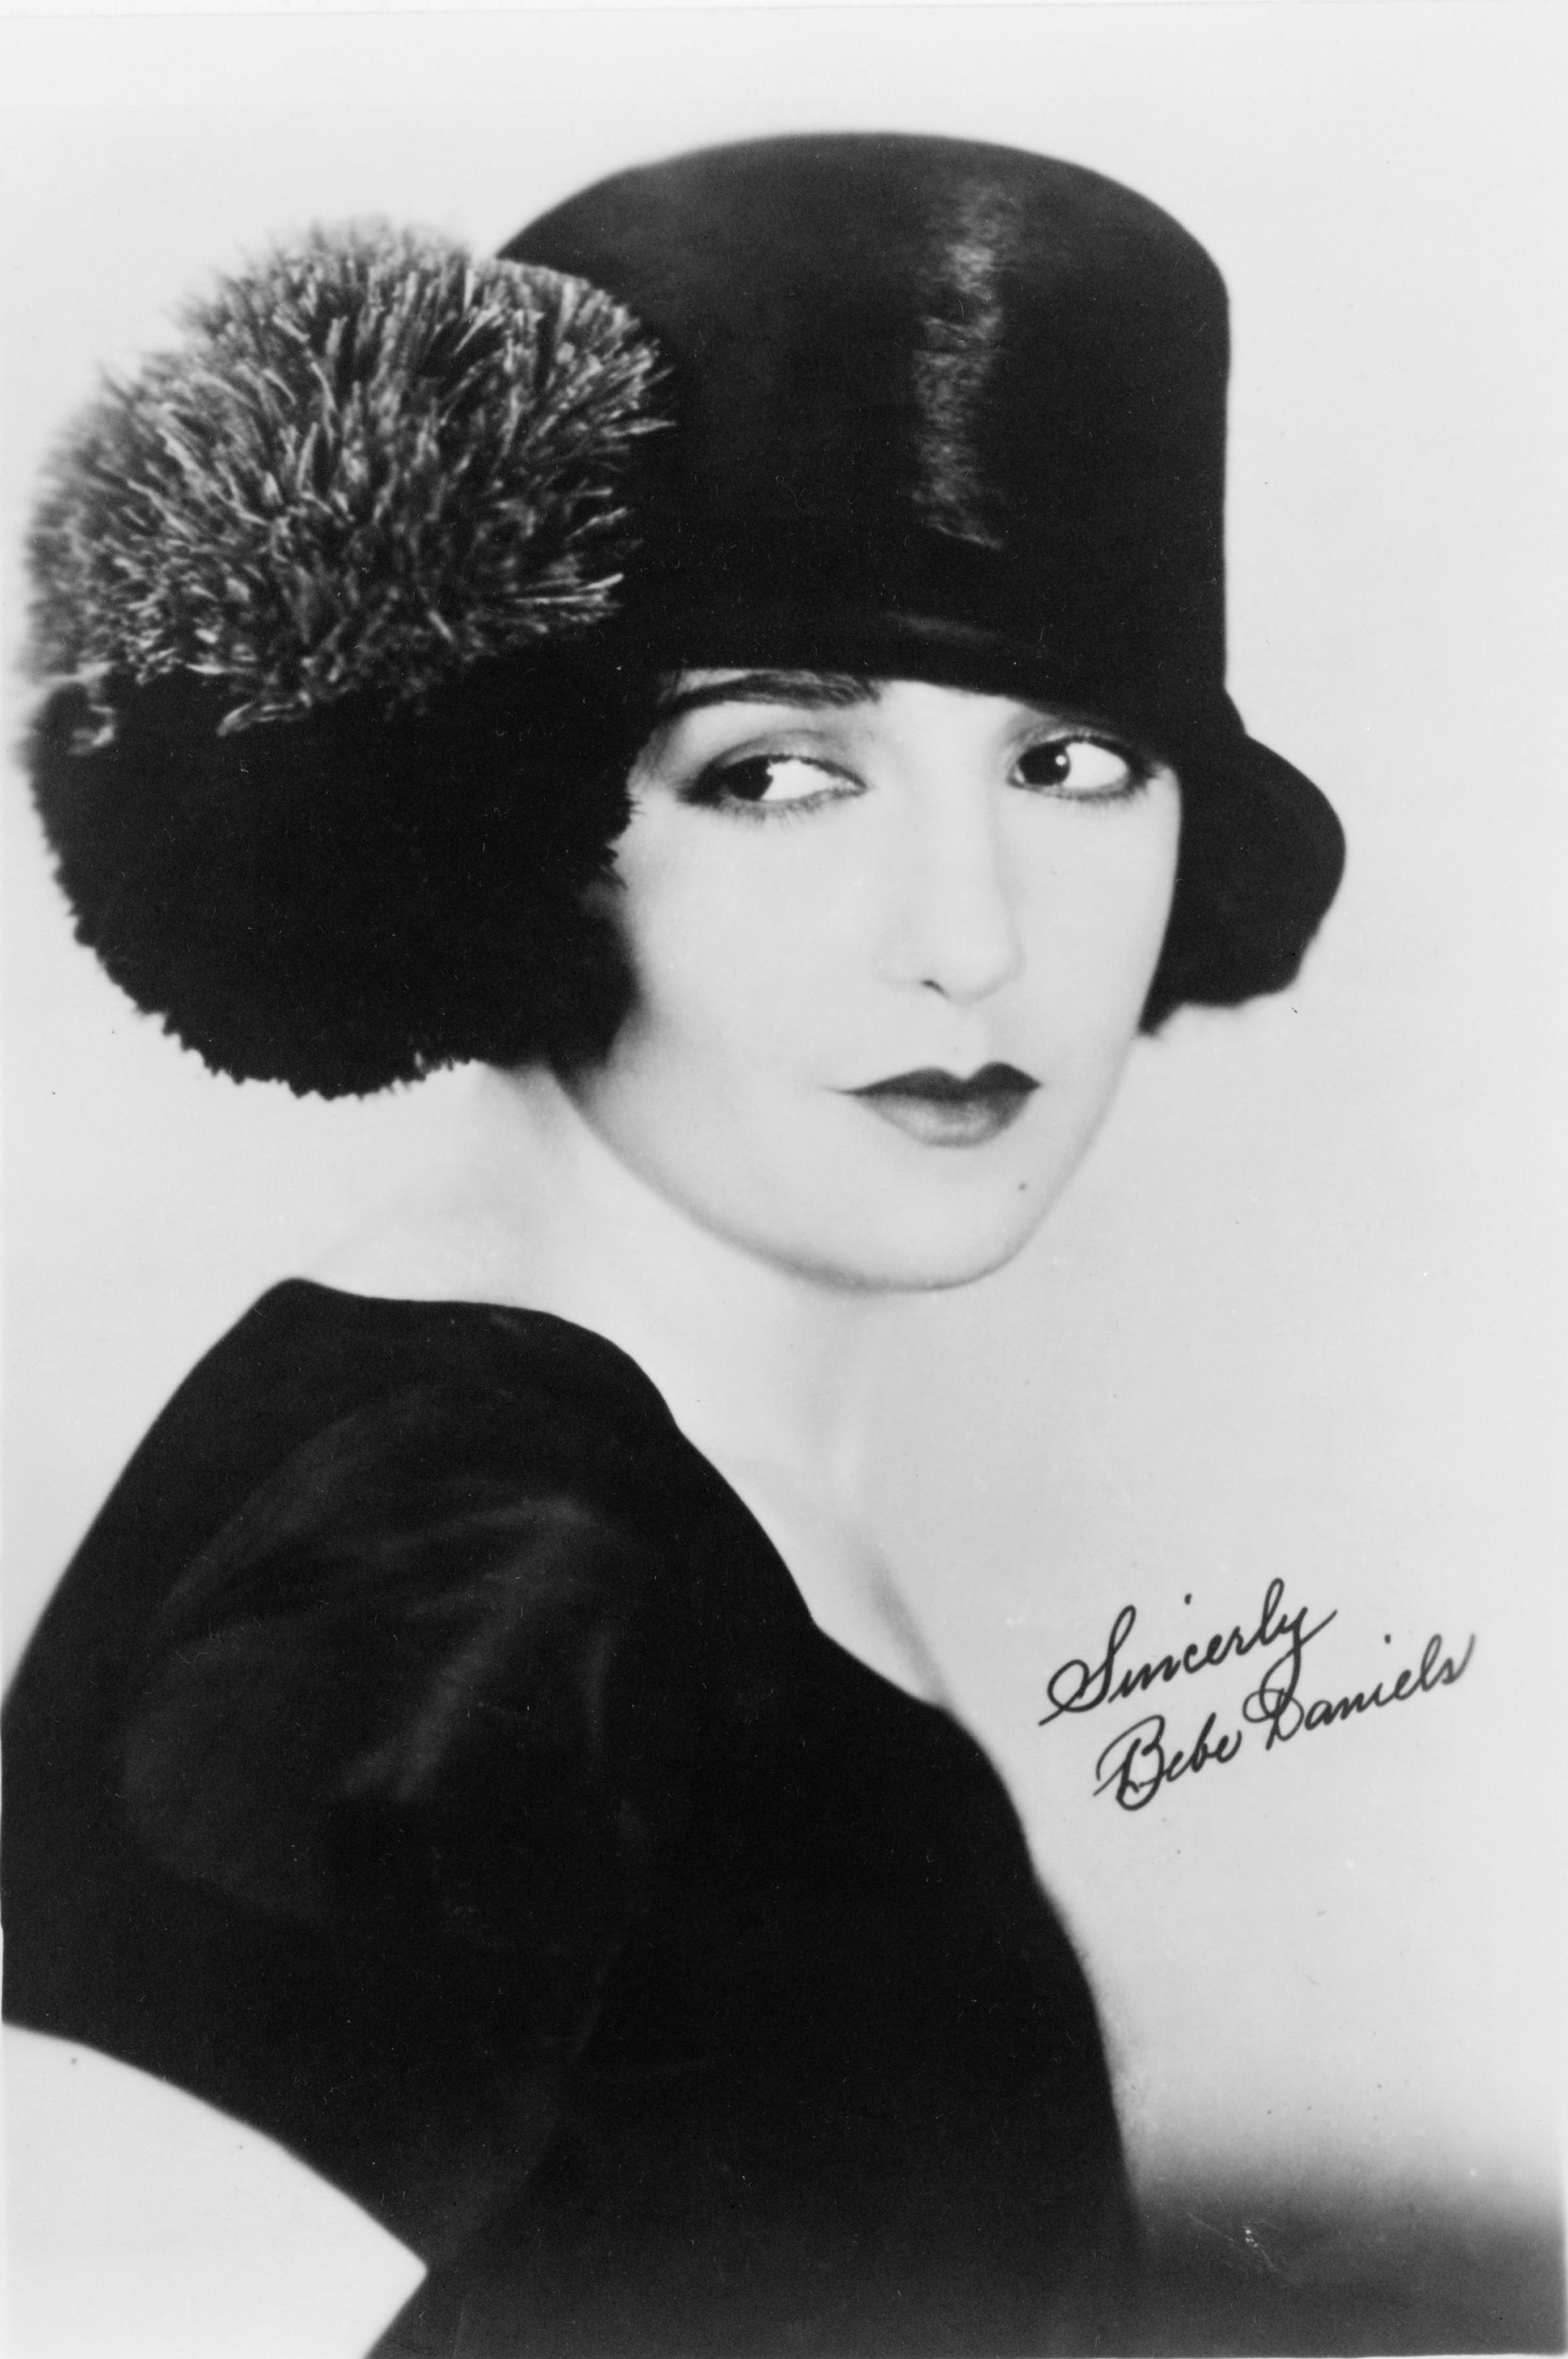 Bebe Daniels, American actress (d. 1971) was born on January 14, 1901.